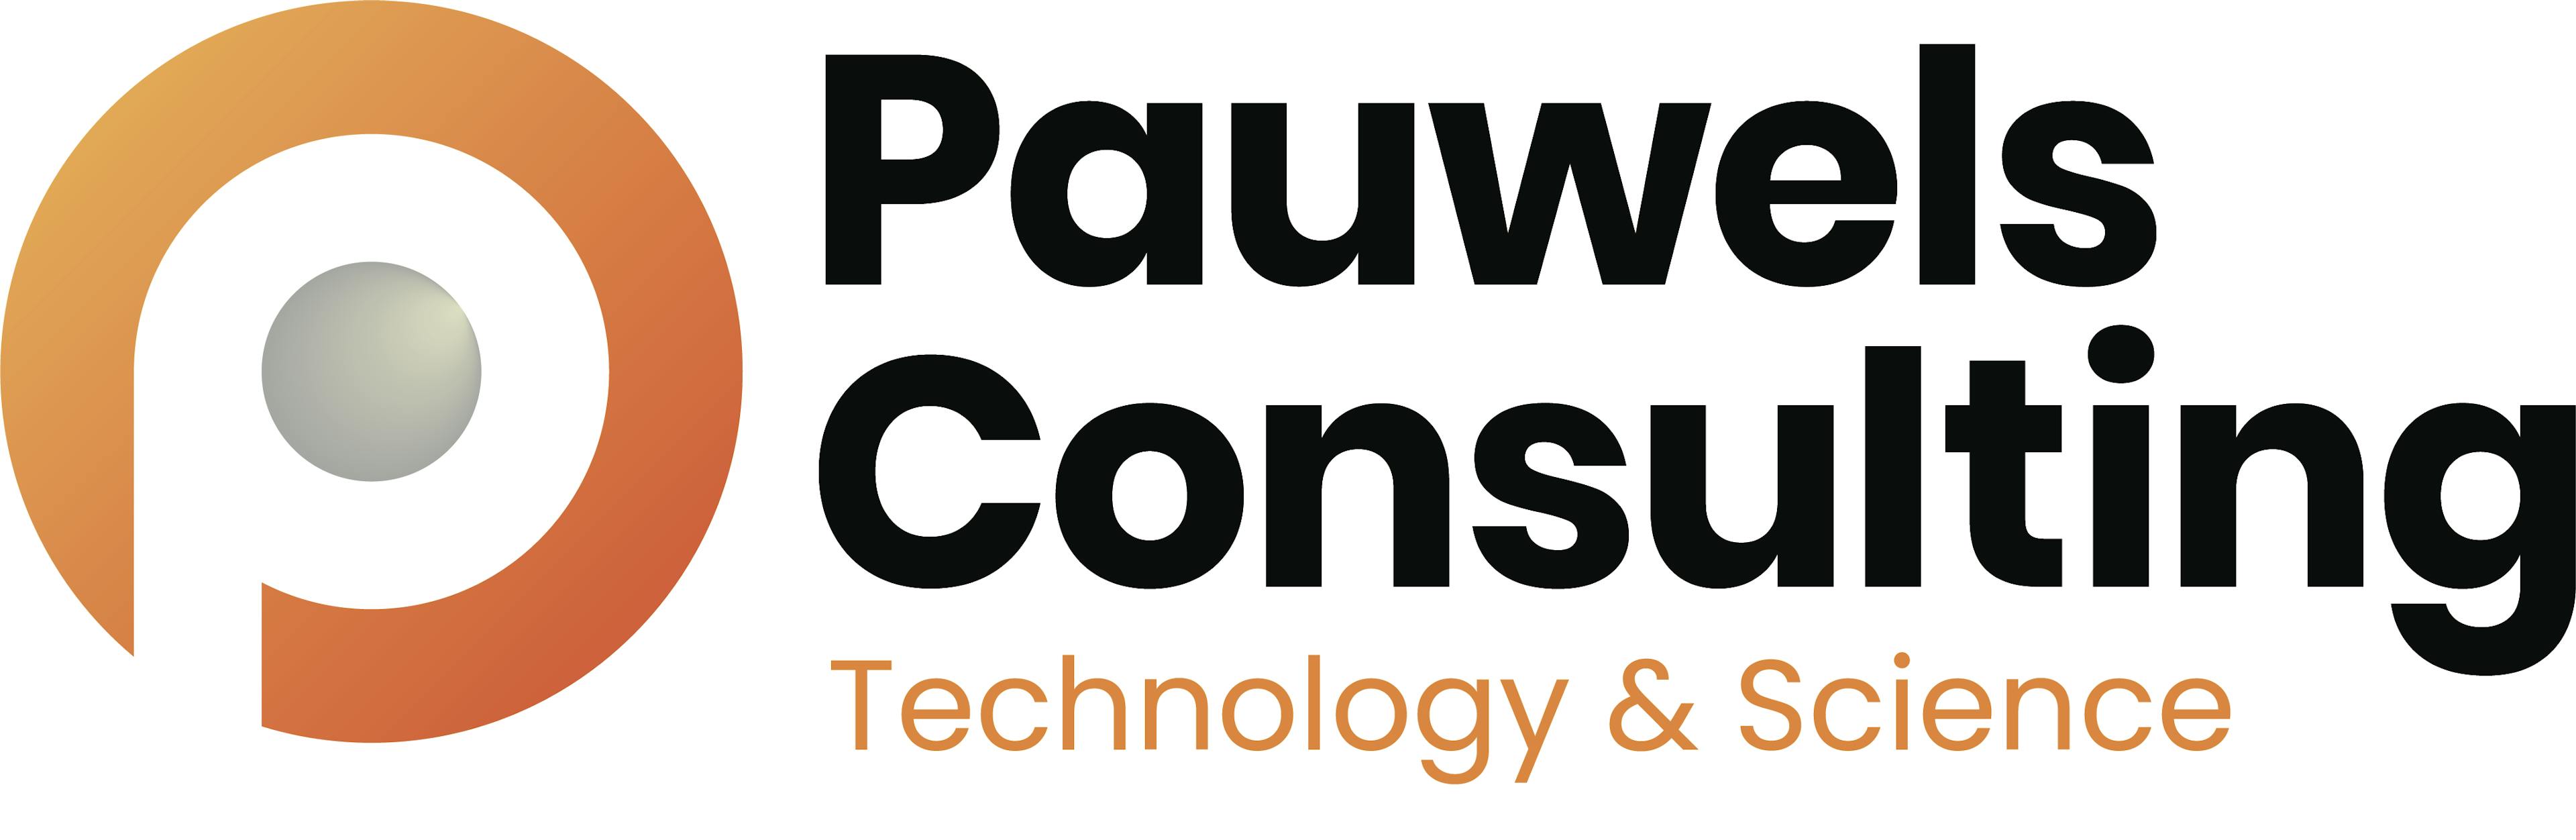 Pauwels consulting logo